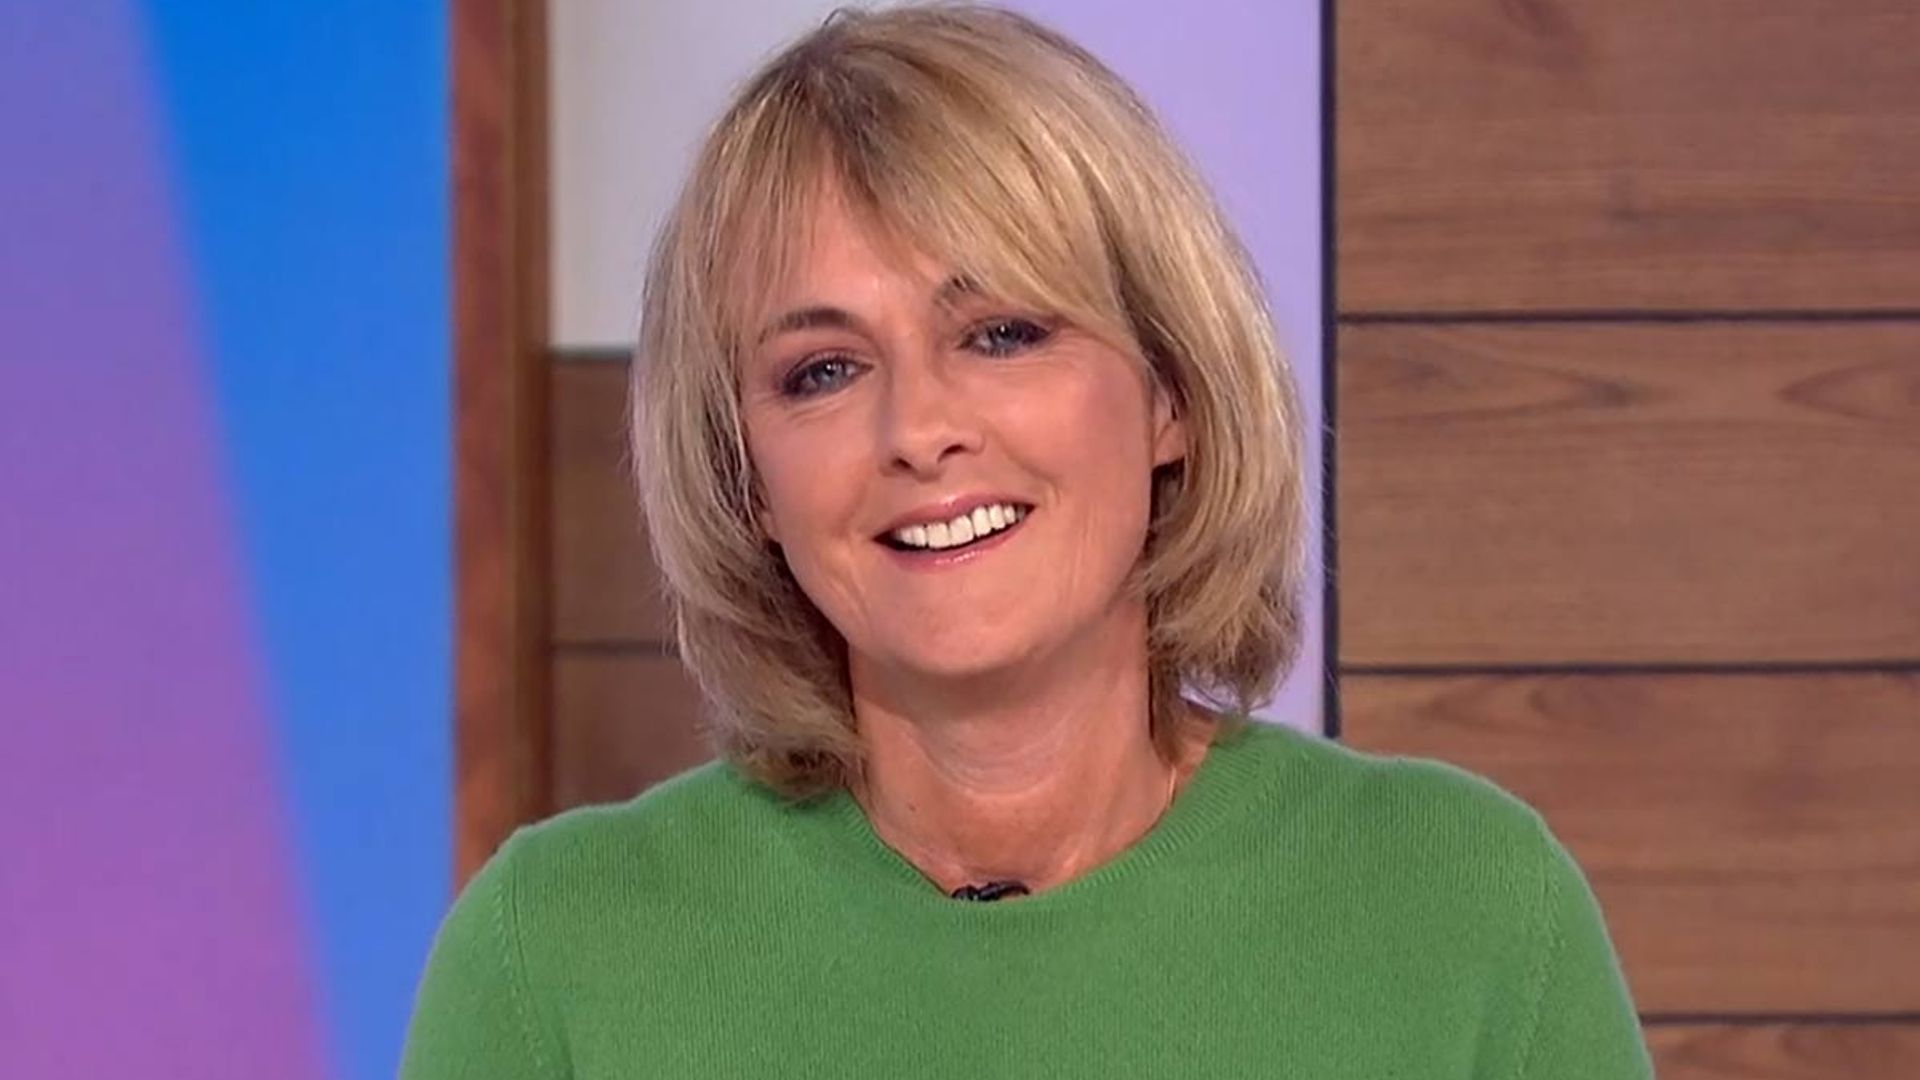 Jane Moore just rocked M&S cashmere in the most unexpected way